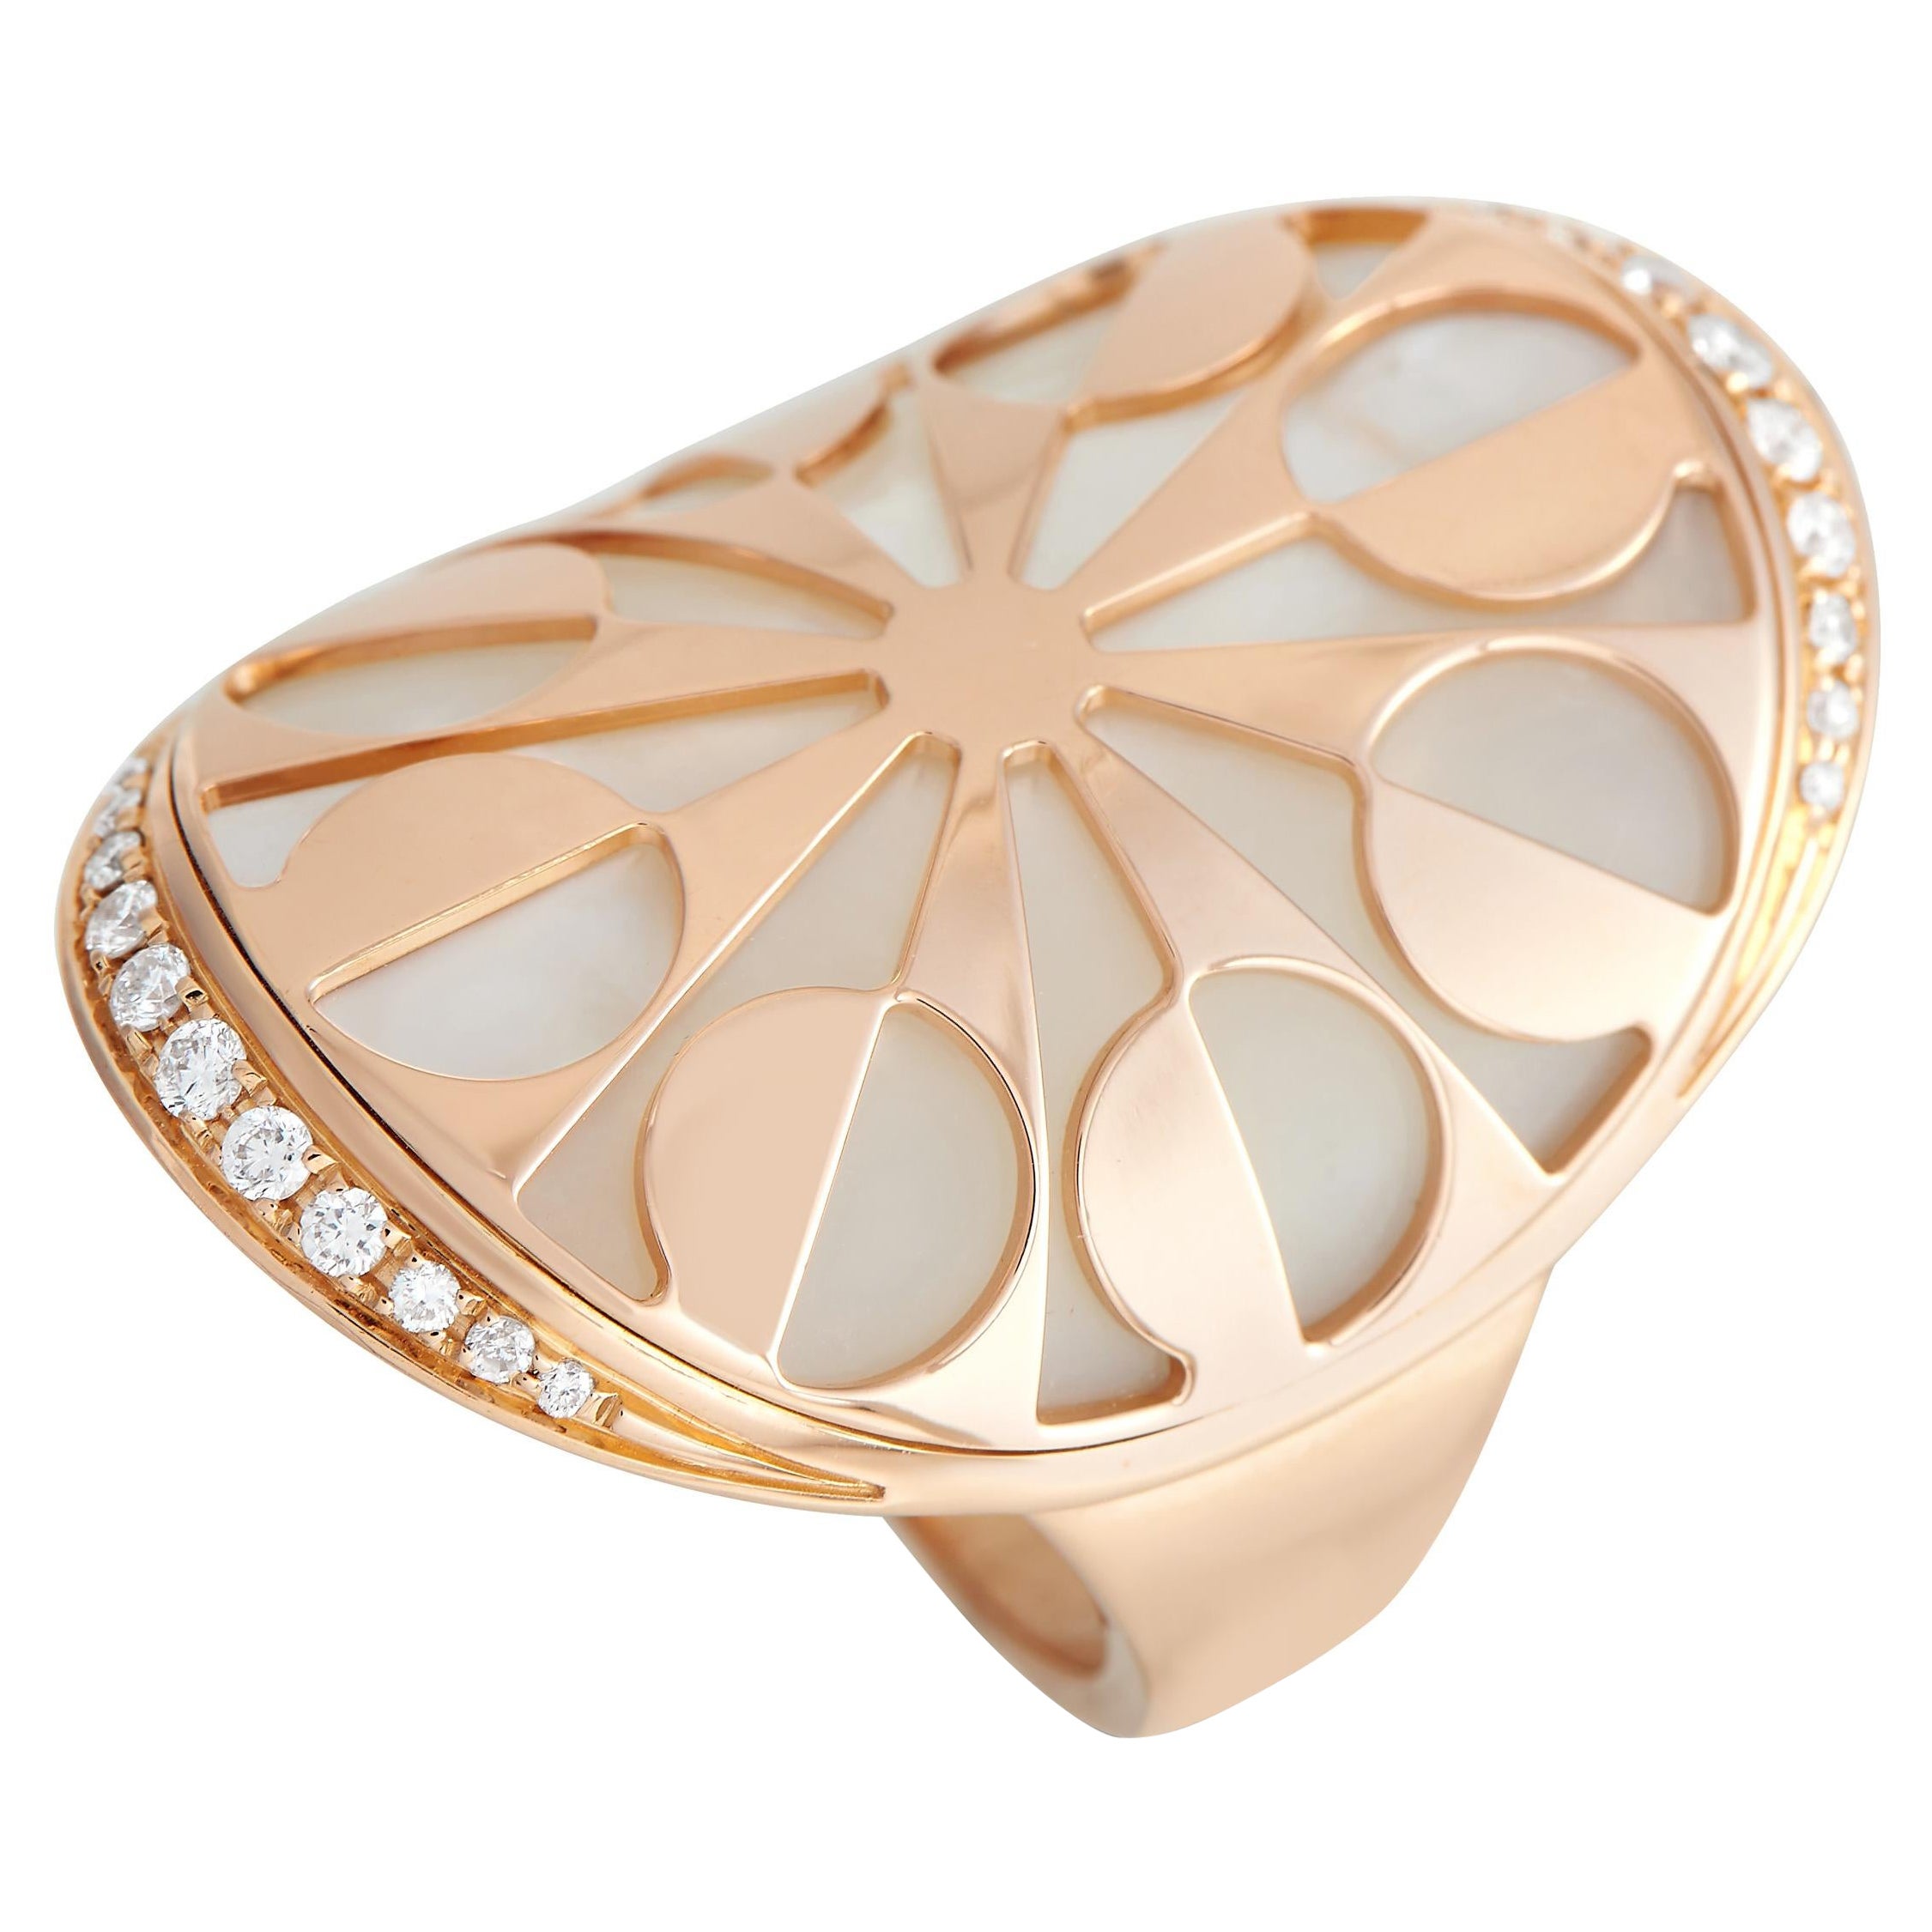 Bvlgari Intarsio 18K Rose Gold 0.20ct Diamond and Mother of Pearl Ring For Sale